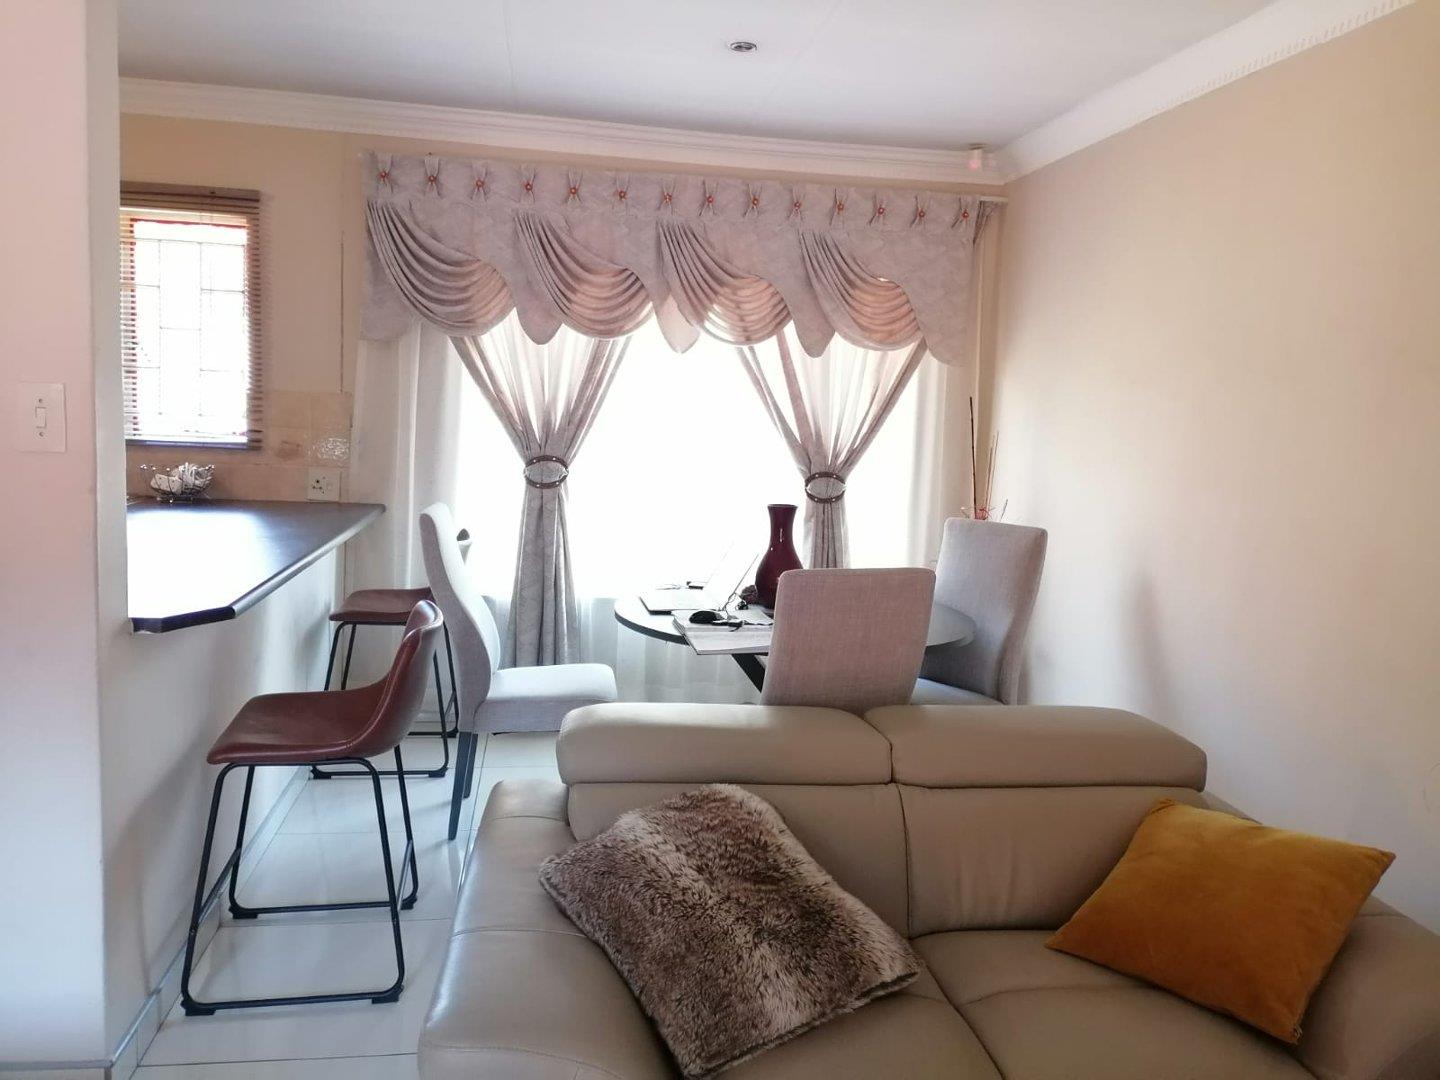 To Let 3 Bedroom Property for Rent in Theresa Park Gauteng